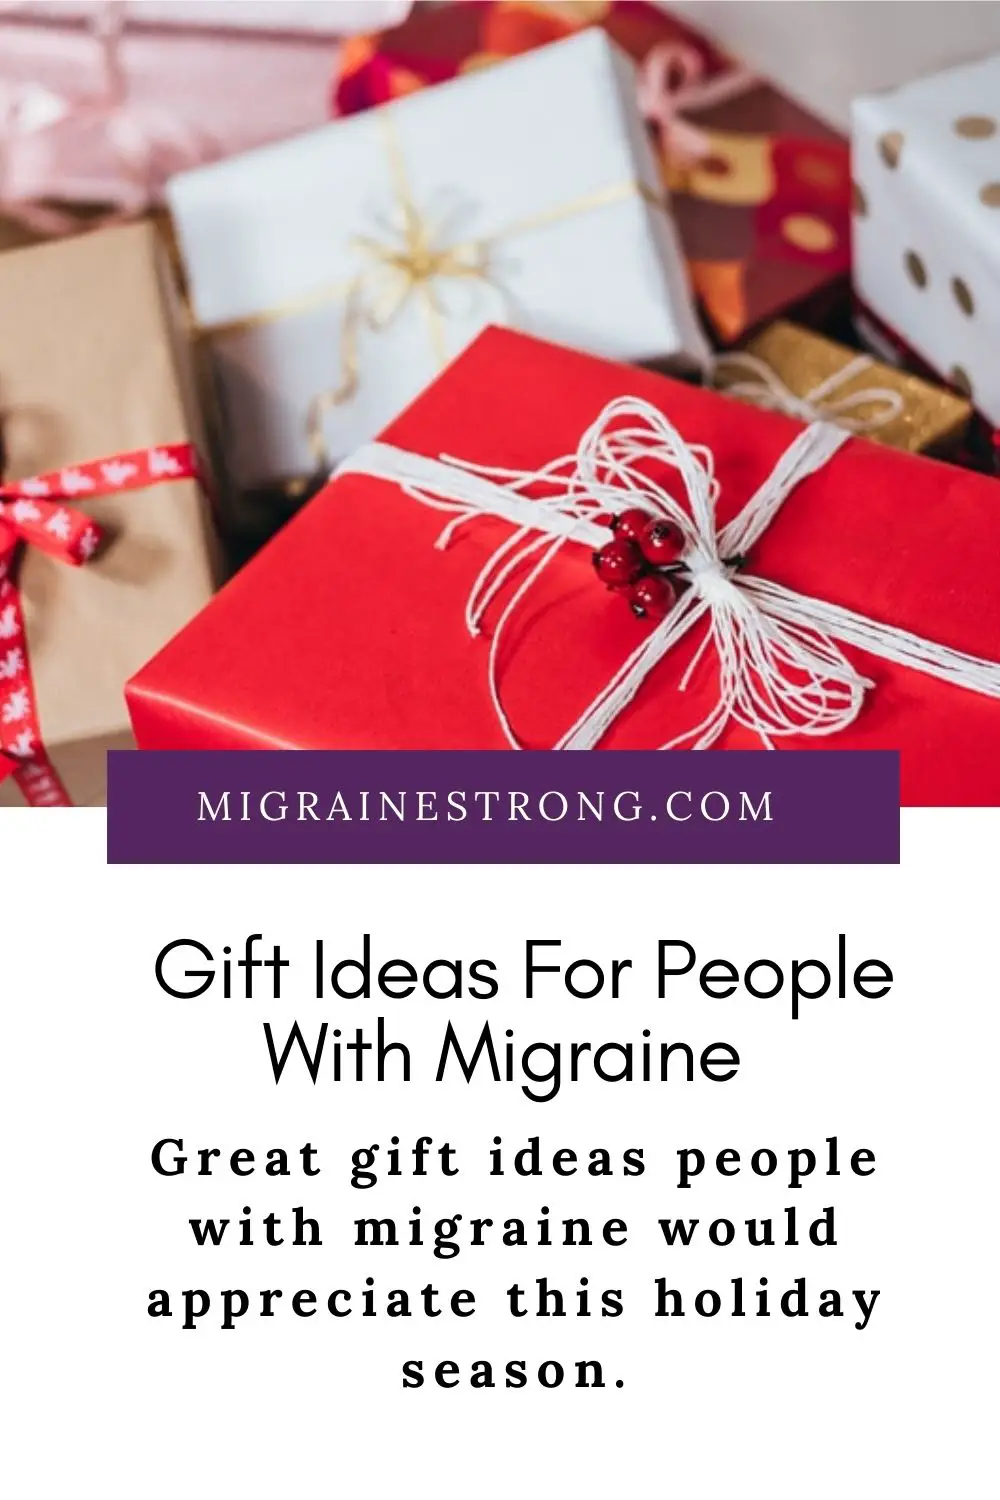 Top 10 Gift Ideas For People With Migraine